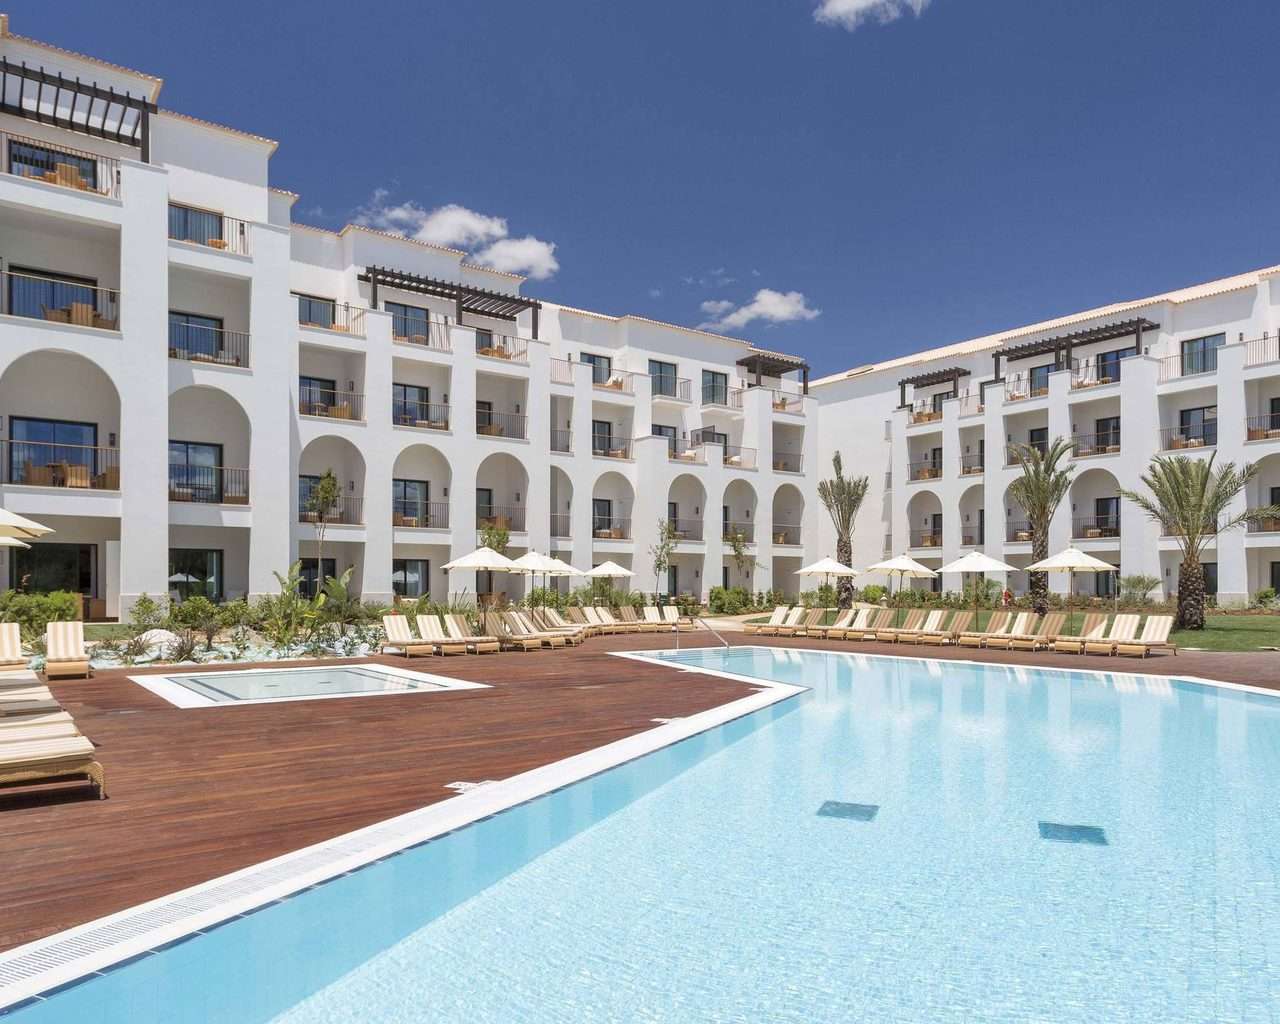 Pine Cliffs Hotel Algarve Offer pool and outside hotel building view